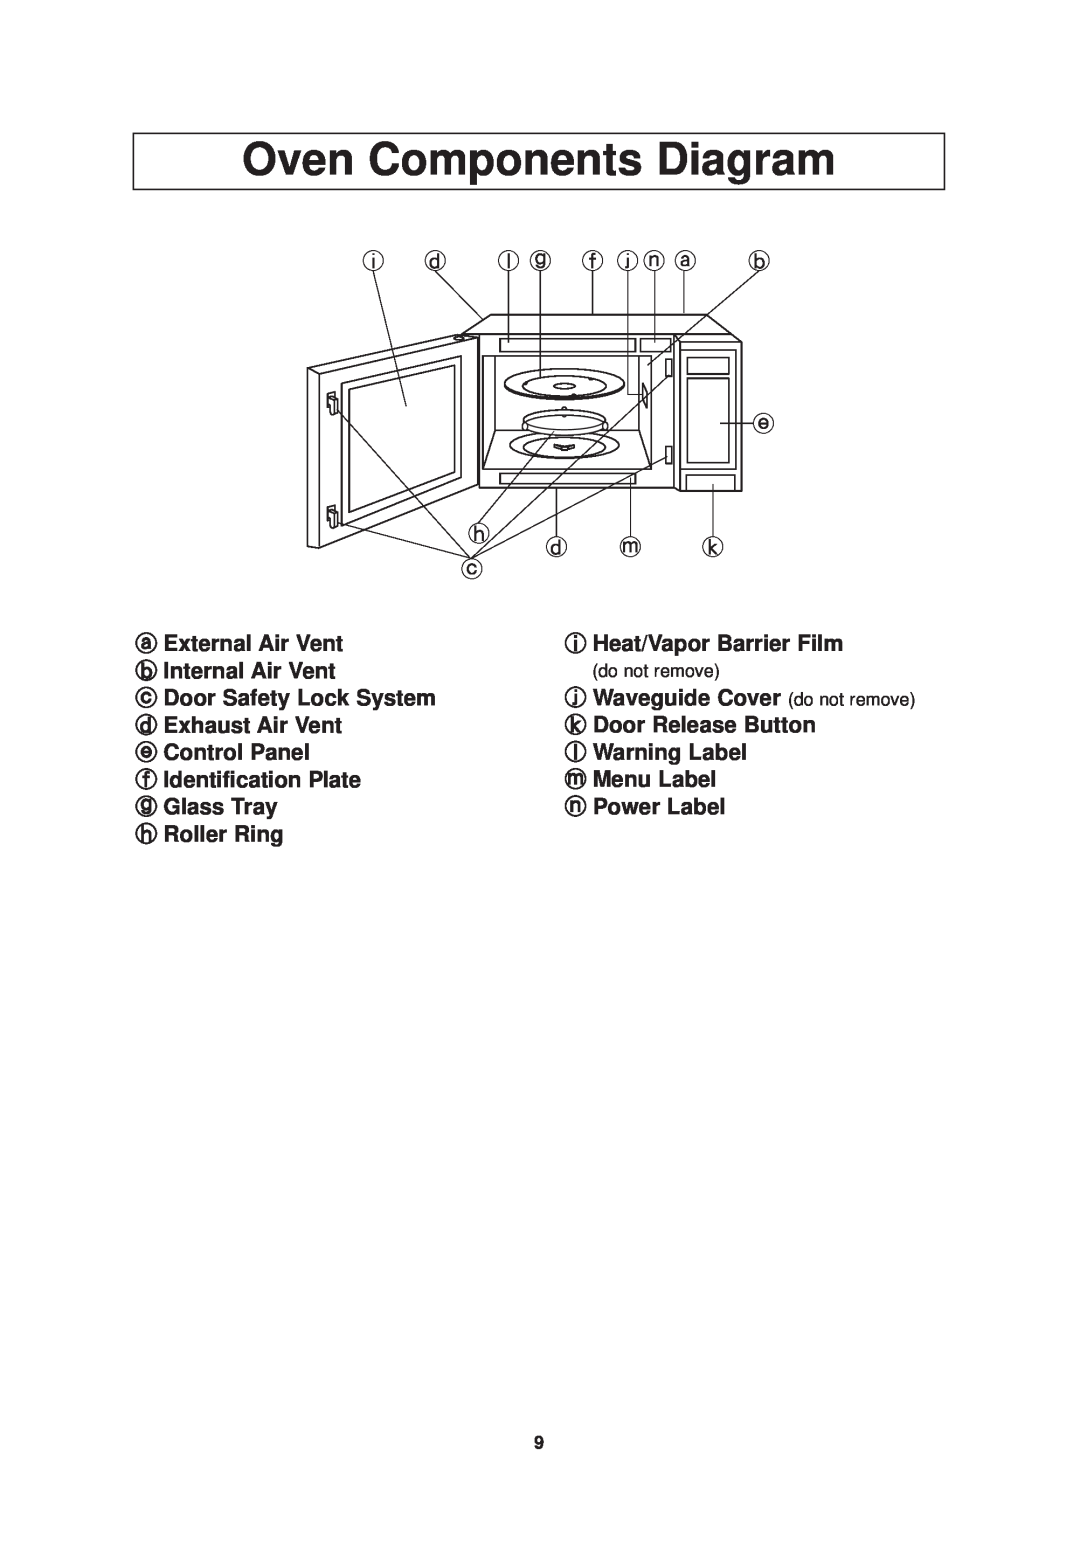 Panasonic NN-SN968 operating instructions Oven Components Diagram 